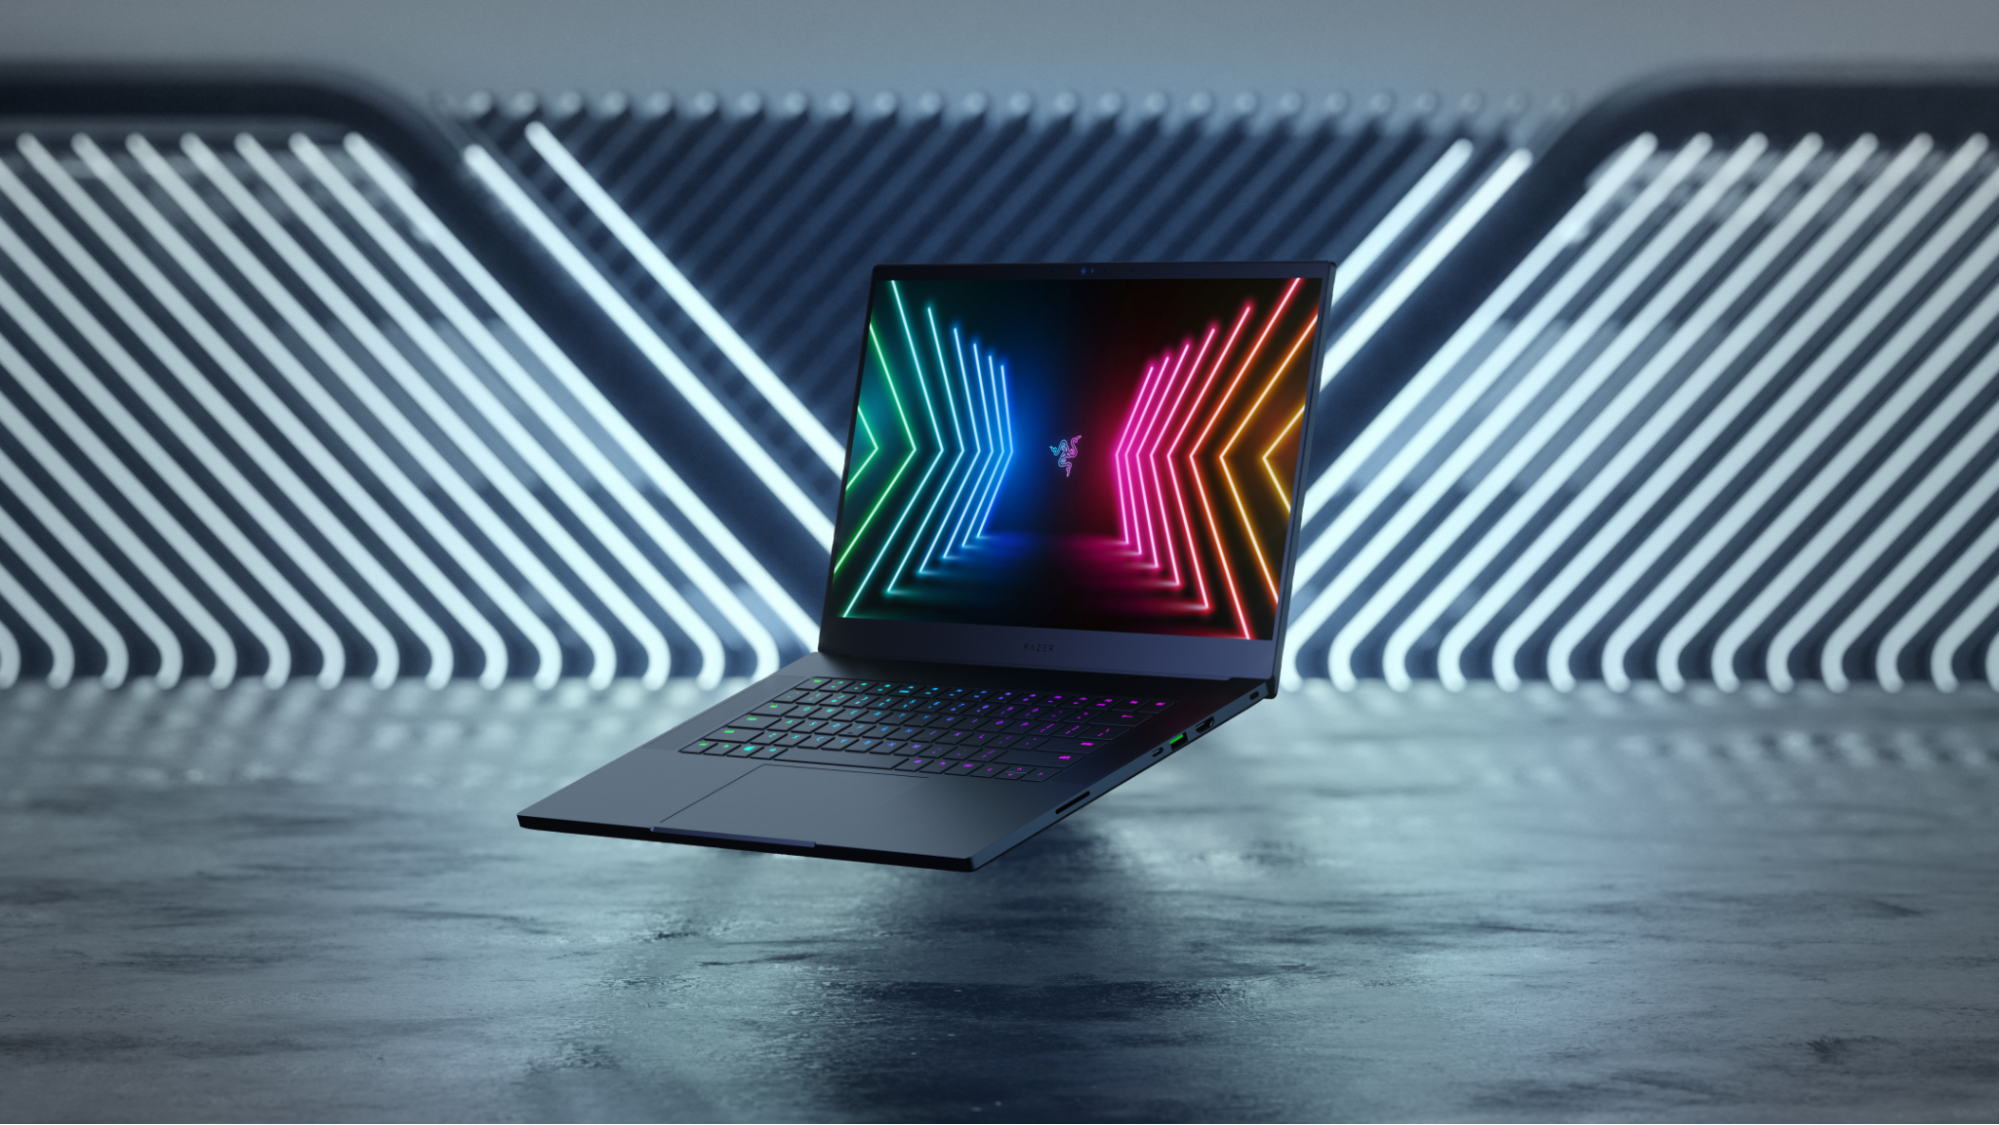 razer-blade-15-gets-thinner-with-intel-tiger-lake